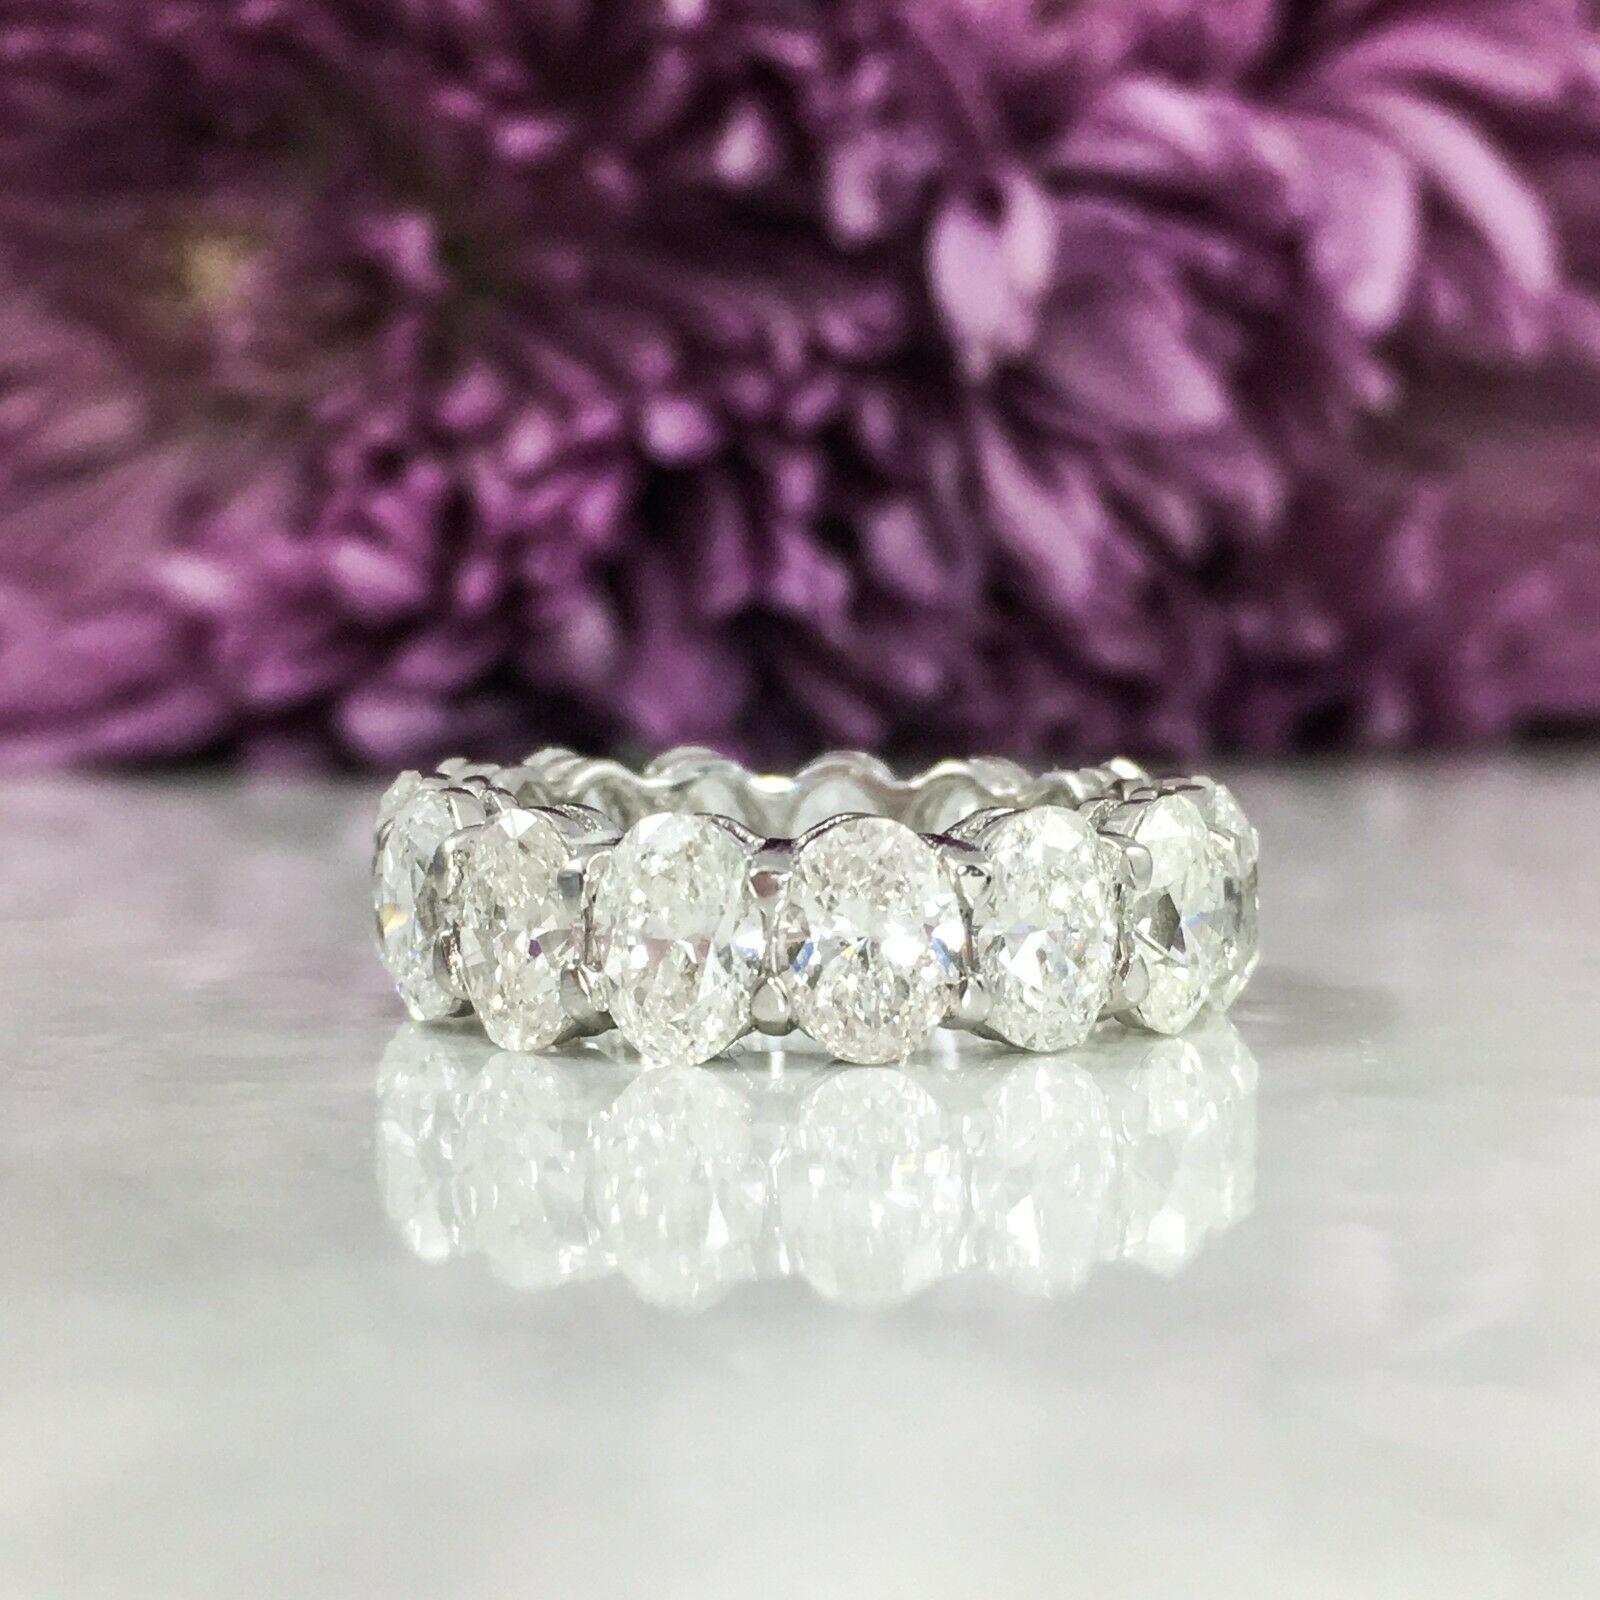 15 oval cut diamonds (7.30 total carat weight) eternity engagement ring in 18k white gold. The ring is designed and handmade locally in Los Angeles by Sage Designs L.A. using earth-mined and conflict free diamonds. The ring is 6.0mm wide and weighs